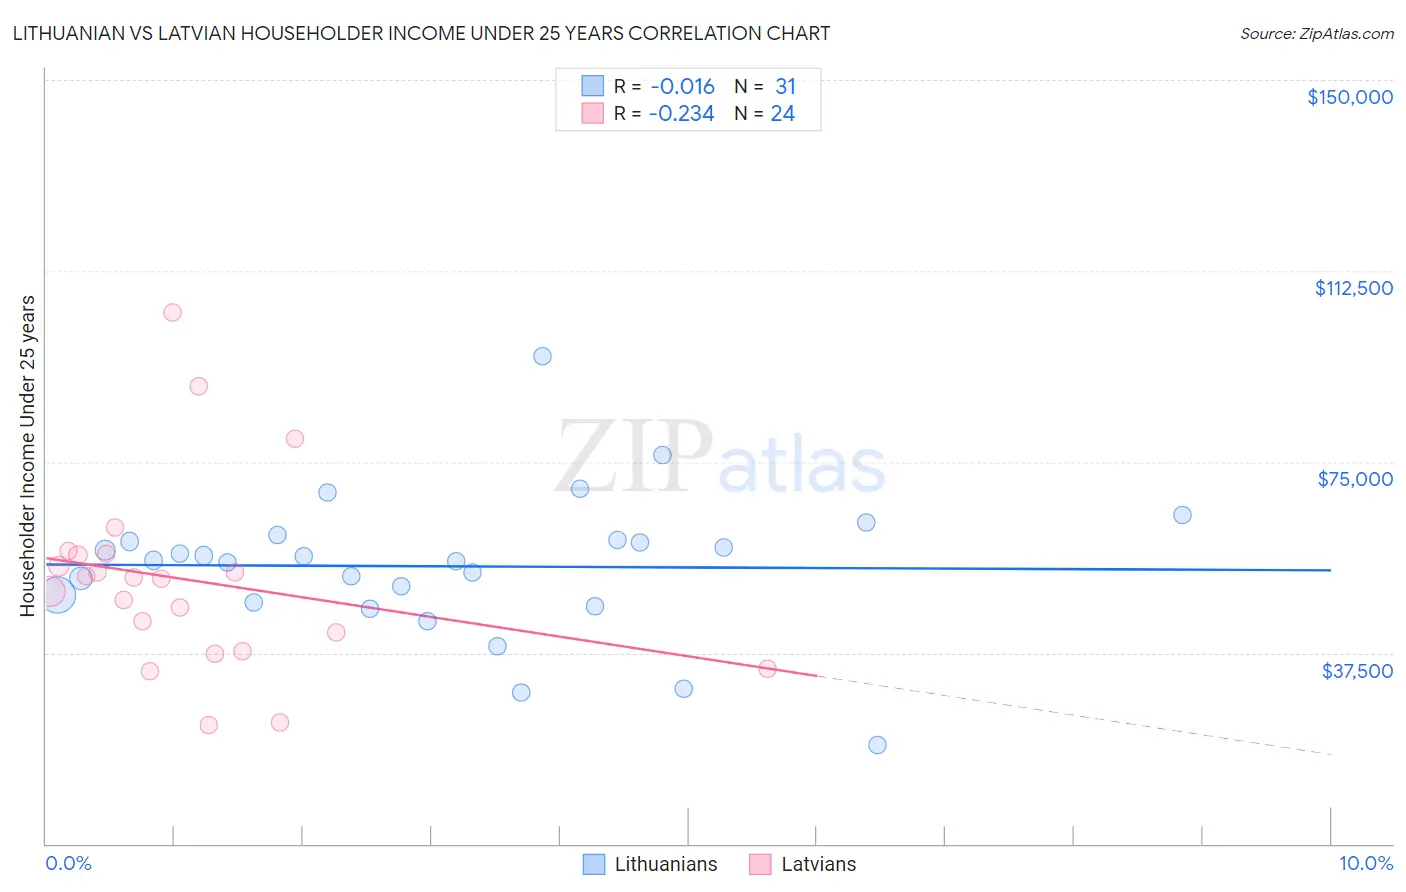 Lithuanian vs Latvian Householder Income Under 25 years